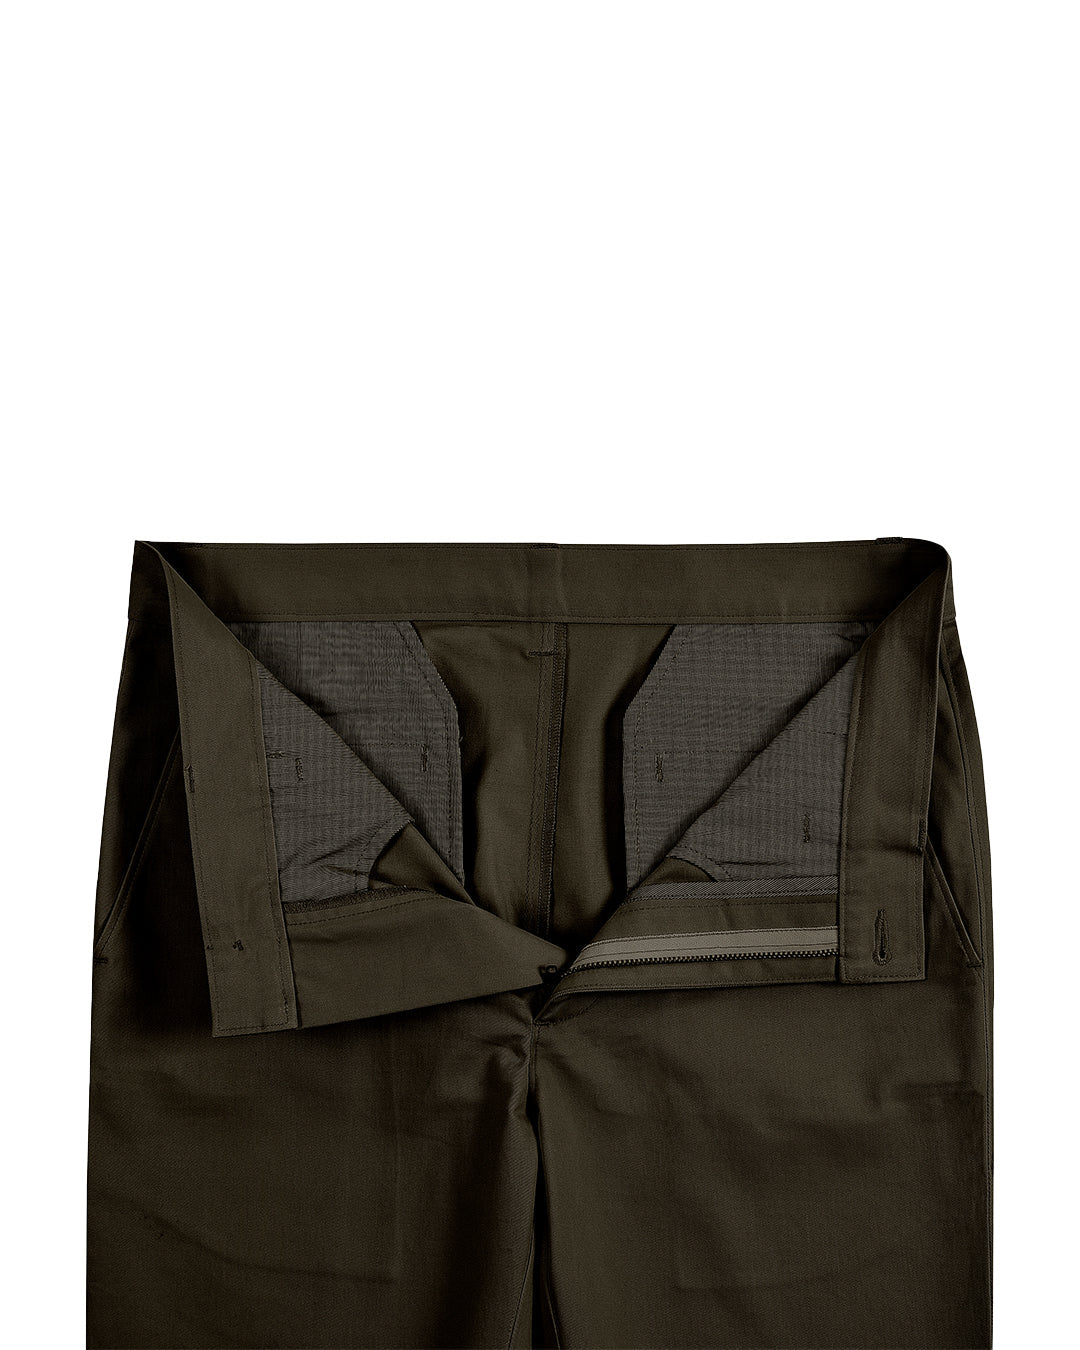 Front open view of custom Genoa Chino pants for men by Luxire in brown